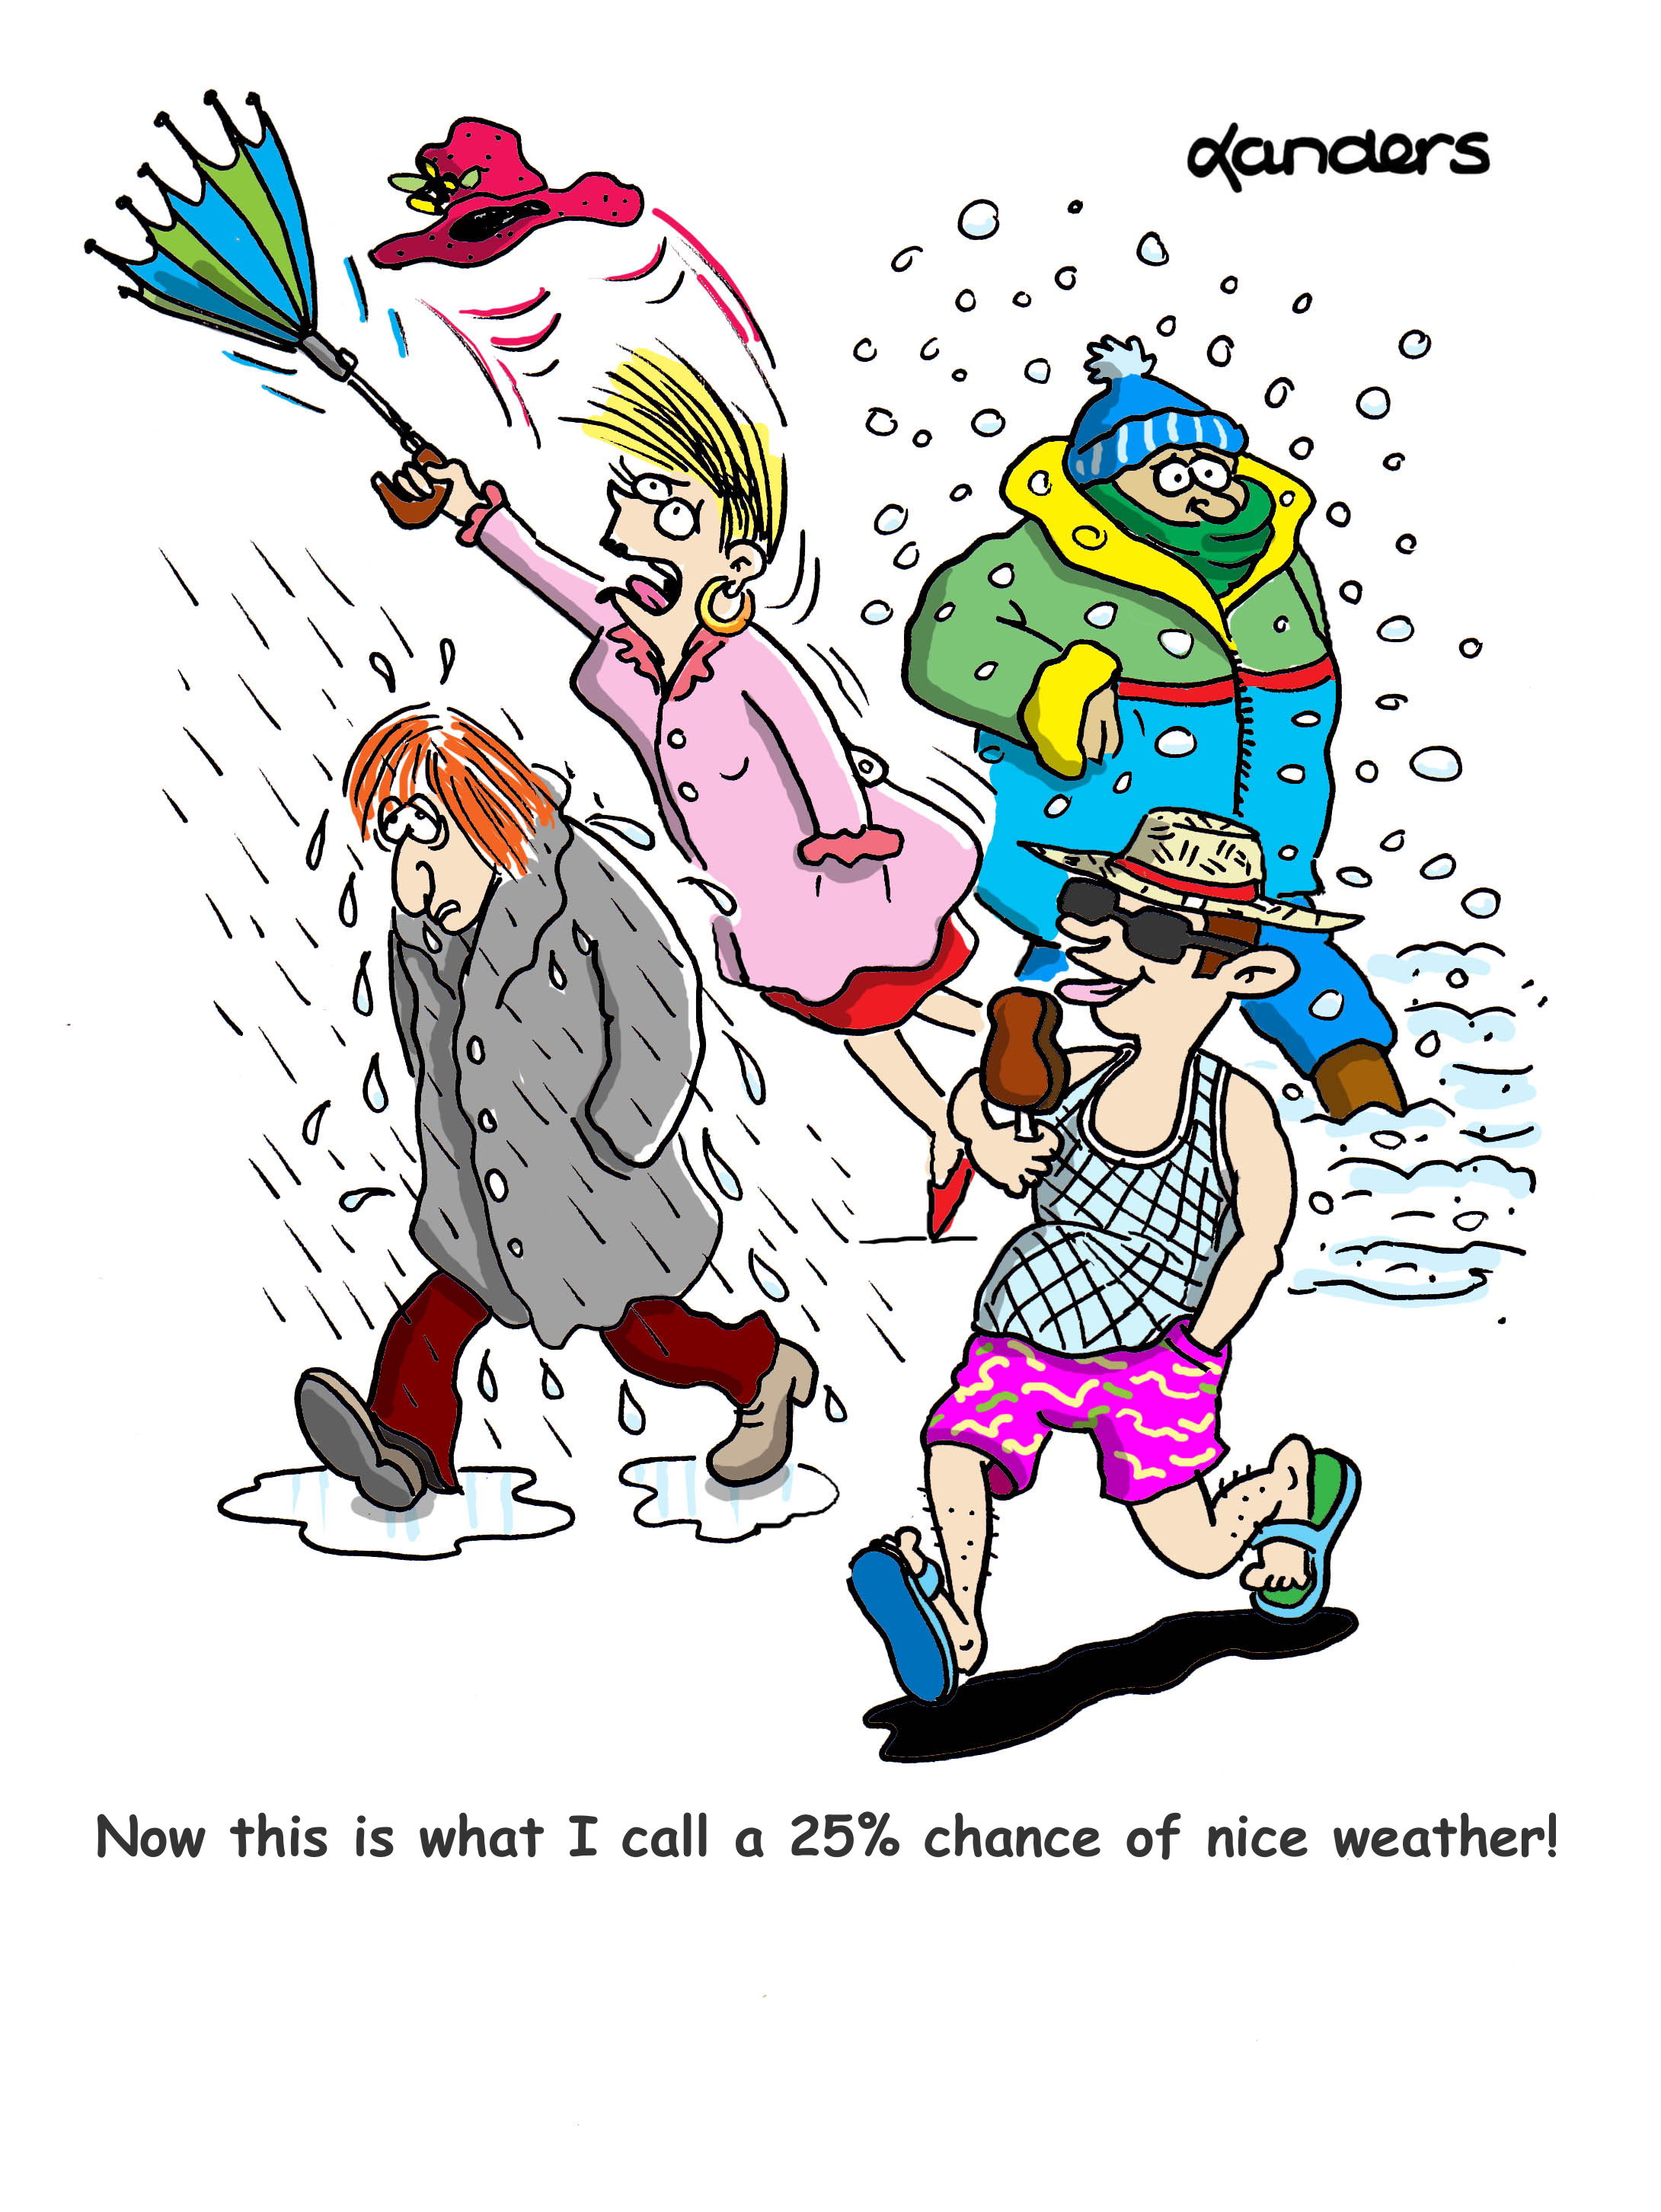 cartoon of 4 people with each experience very different weather